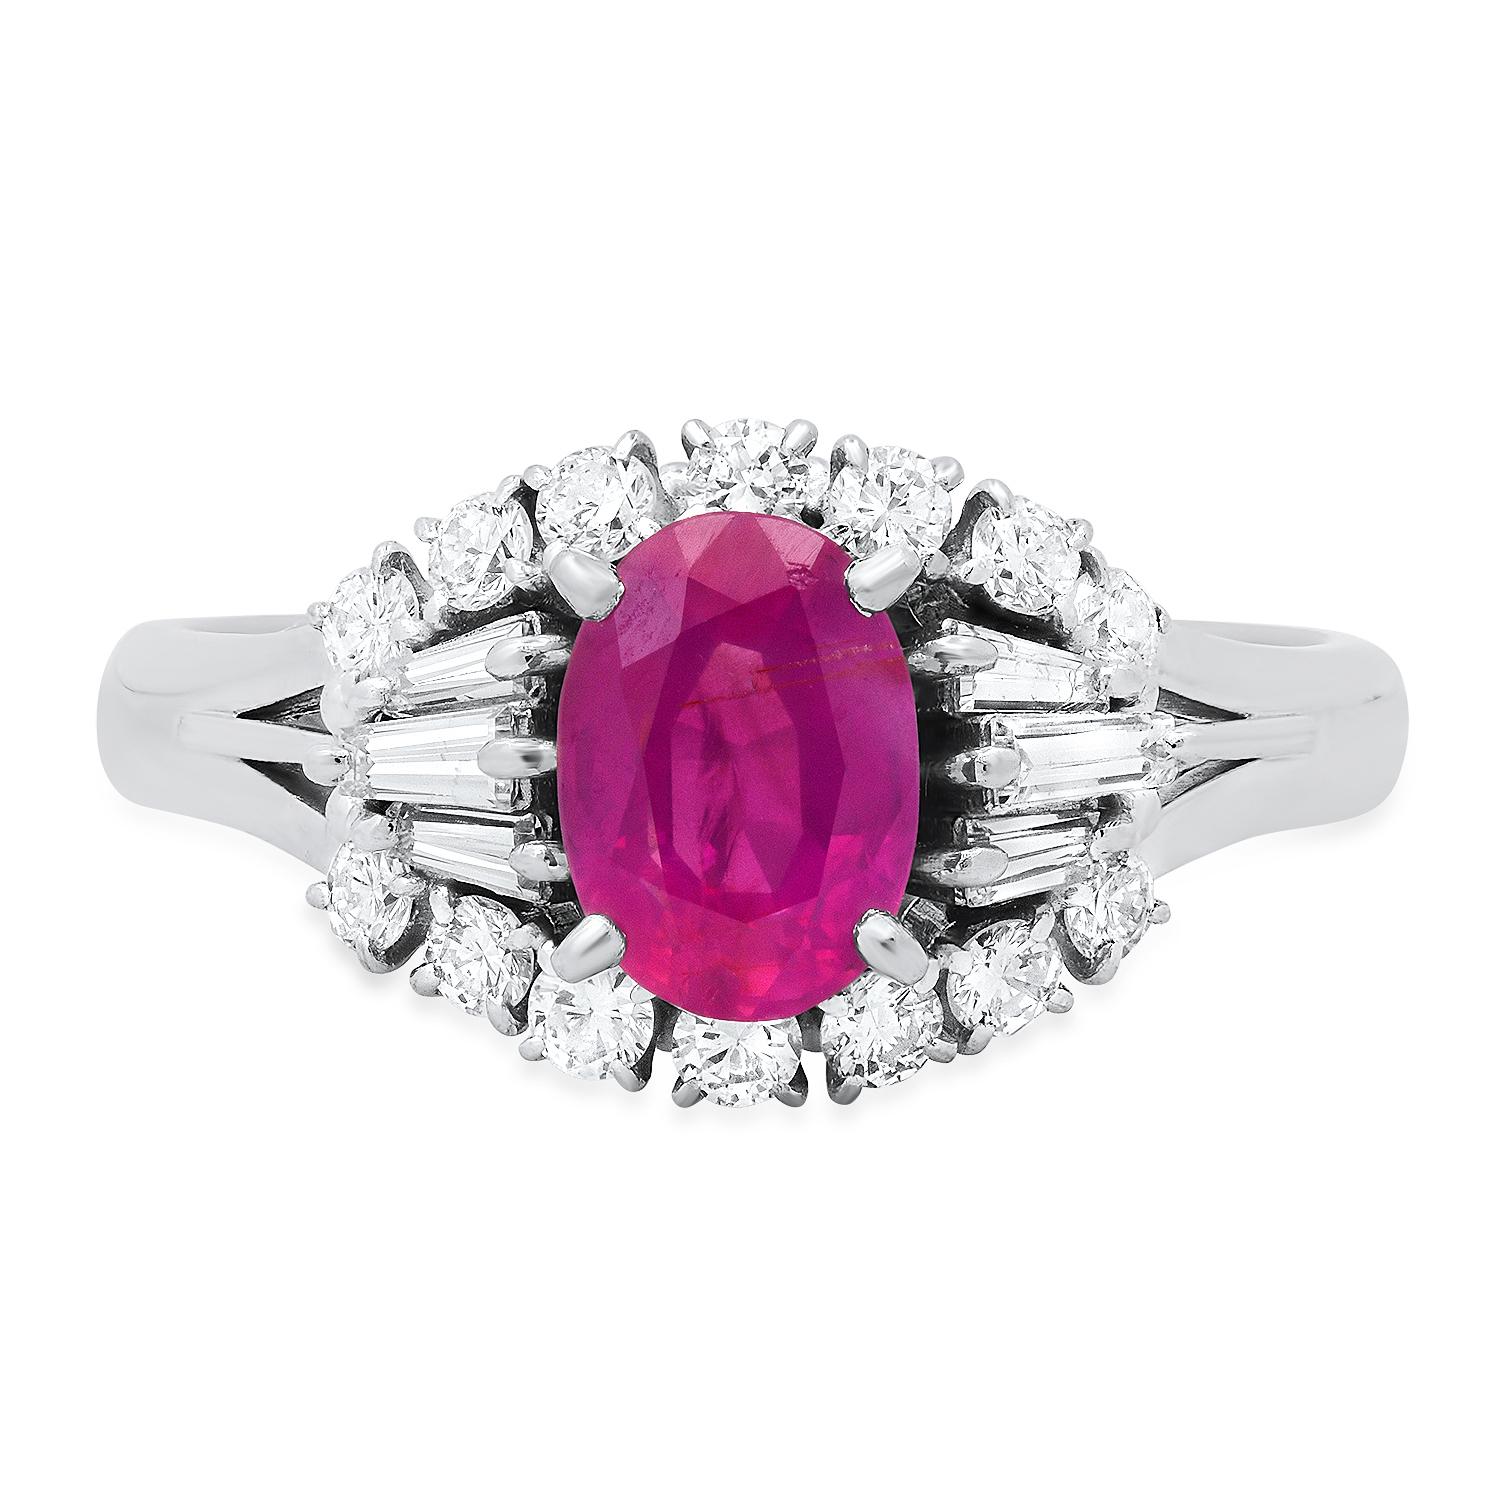 18K White Gold Setting with 1.32ct Ruby and 0.60ct Diamond Ladies Ring